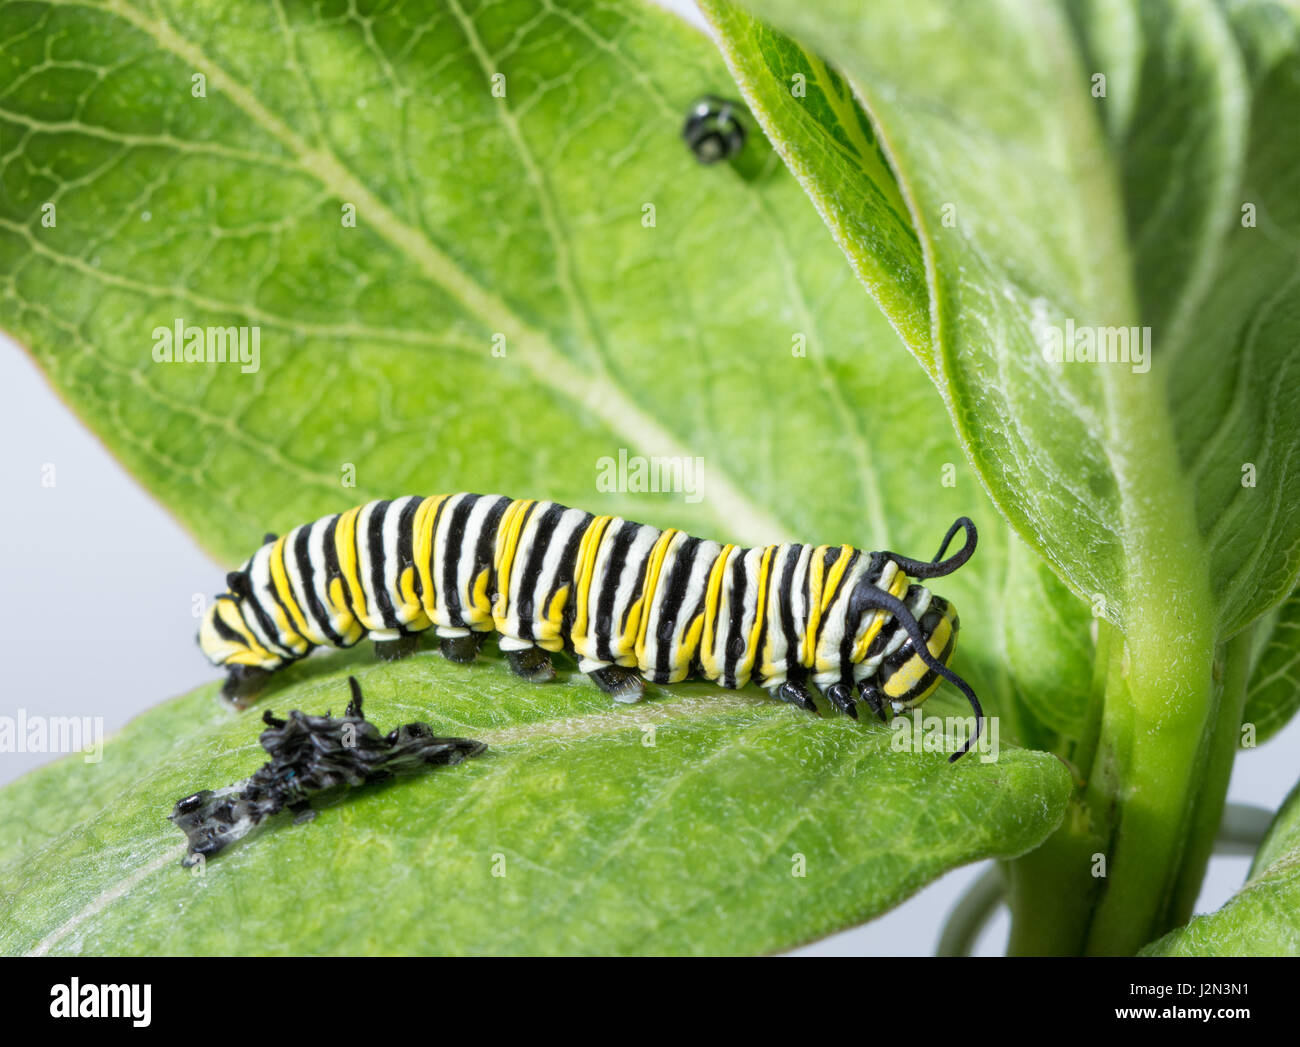 Monarch caterpillar resting right after molting, with his old skin ...